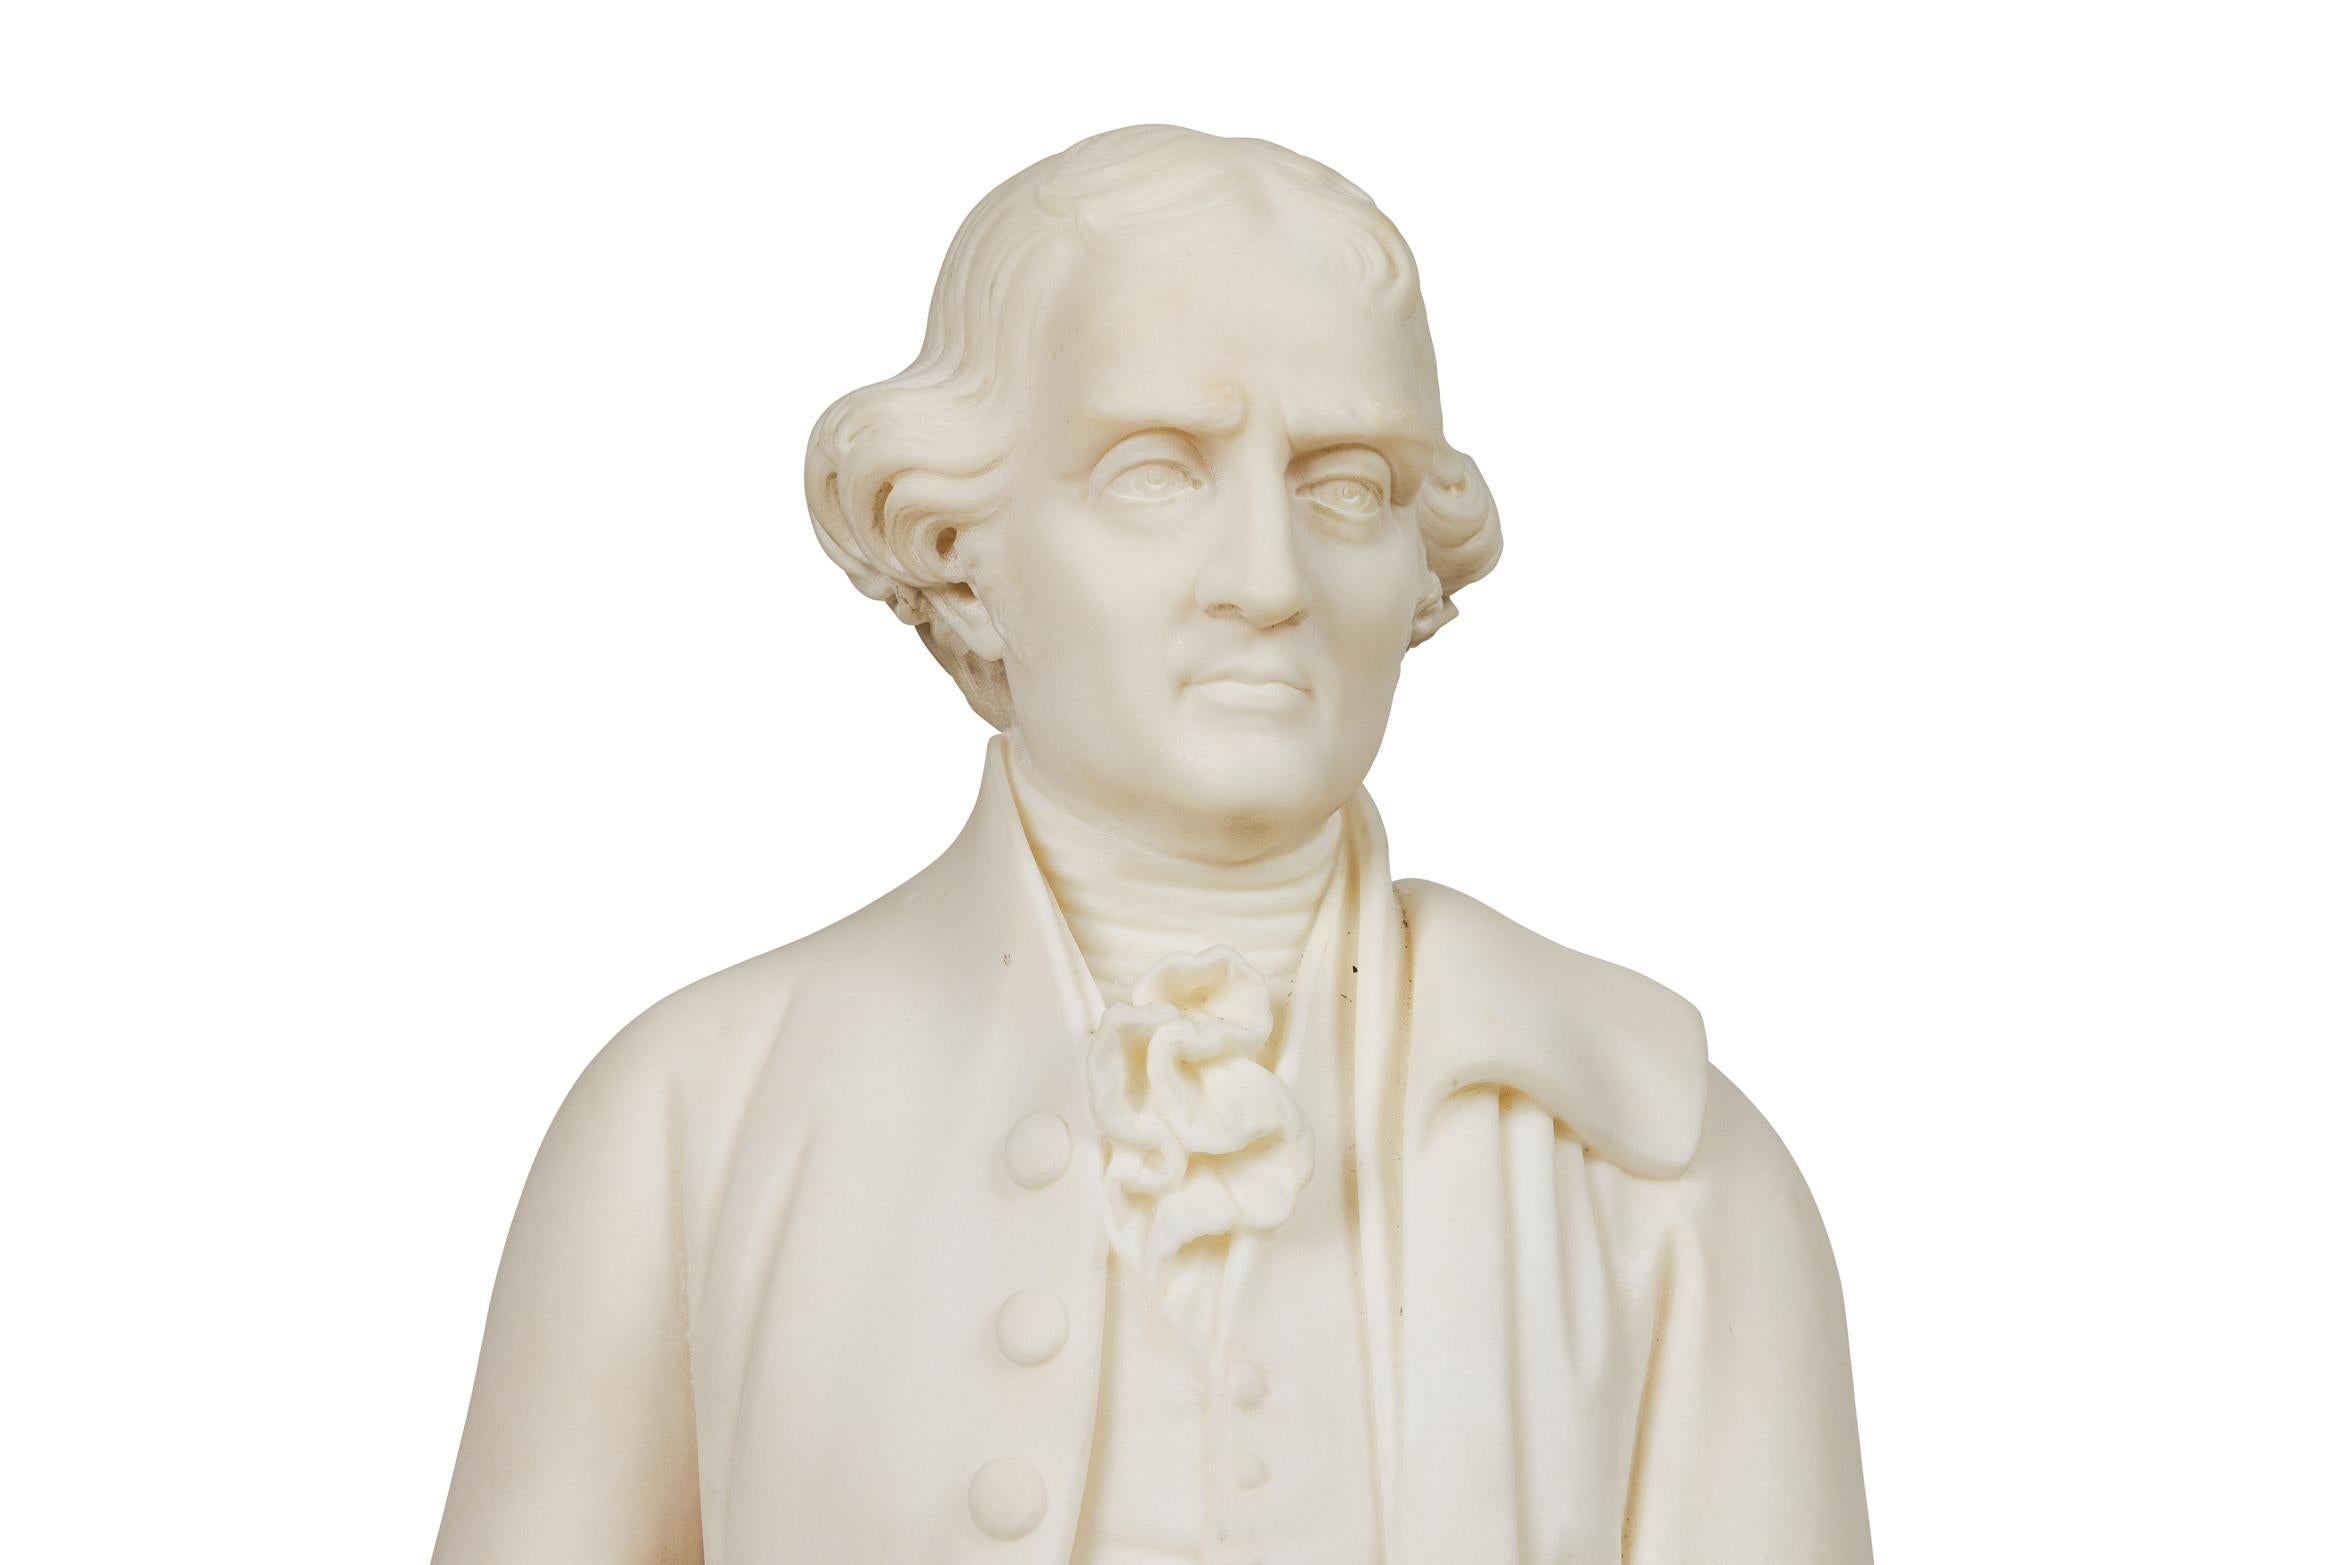 A Rare and Important American Marble Sculpture of Thomas Jefferson, Circa 1870 - Beige Figurative Sculpture by Unknown